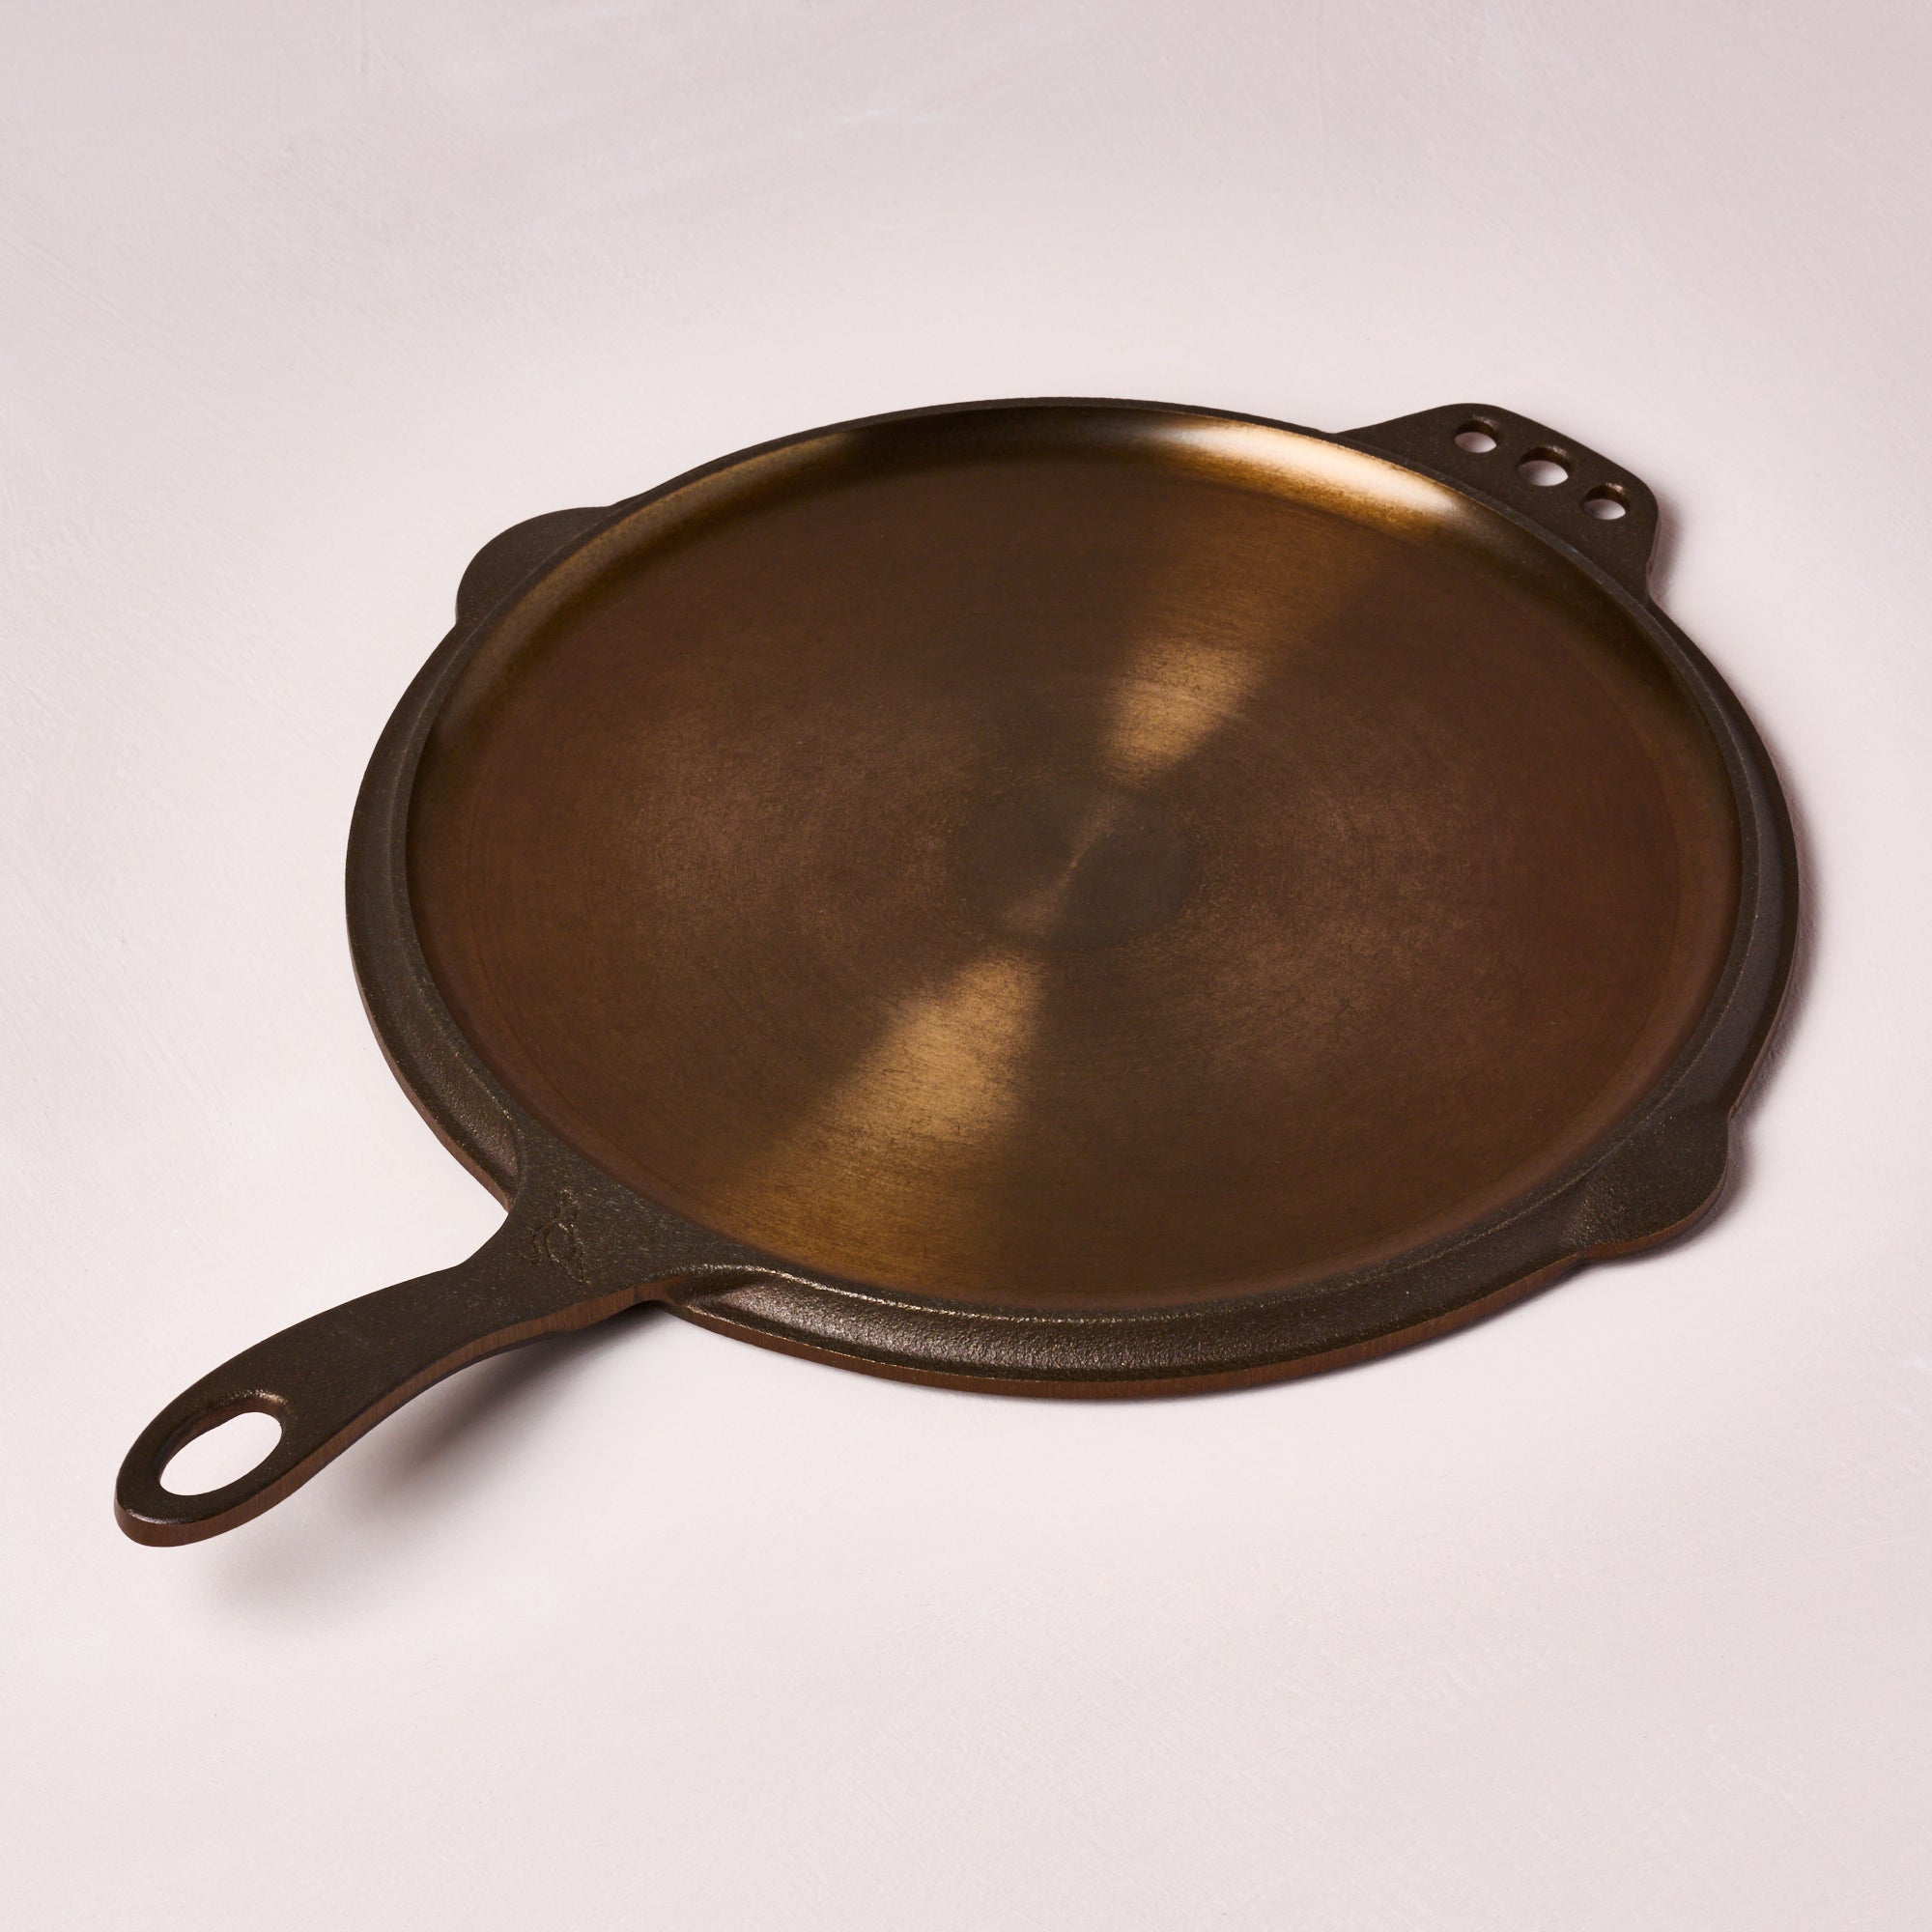 Smithey Ironware No. 12 Flat Top Griddle – Atomic 79